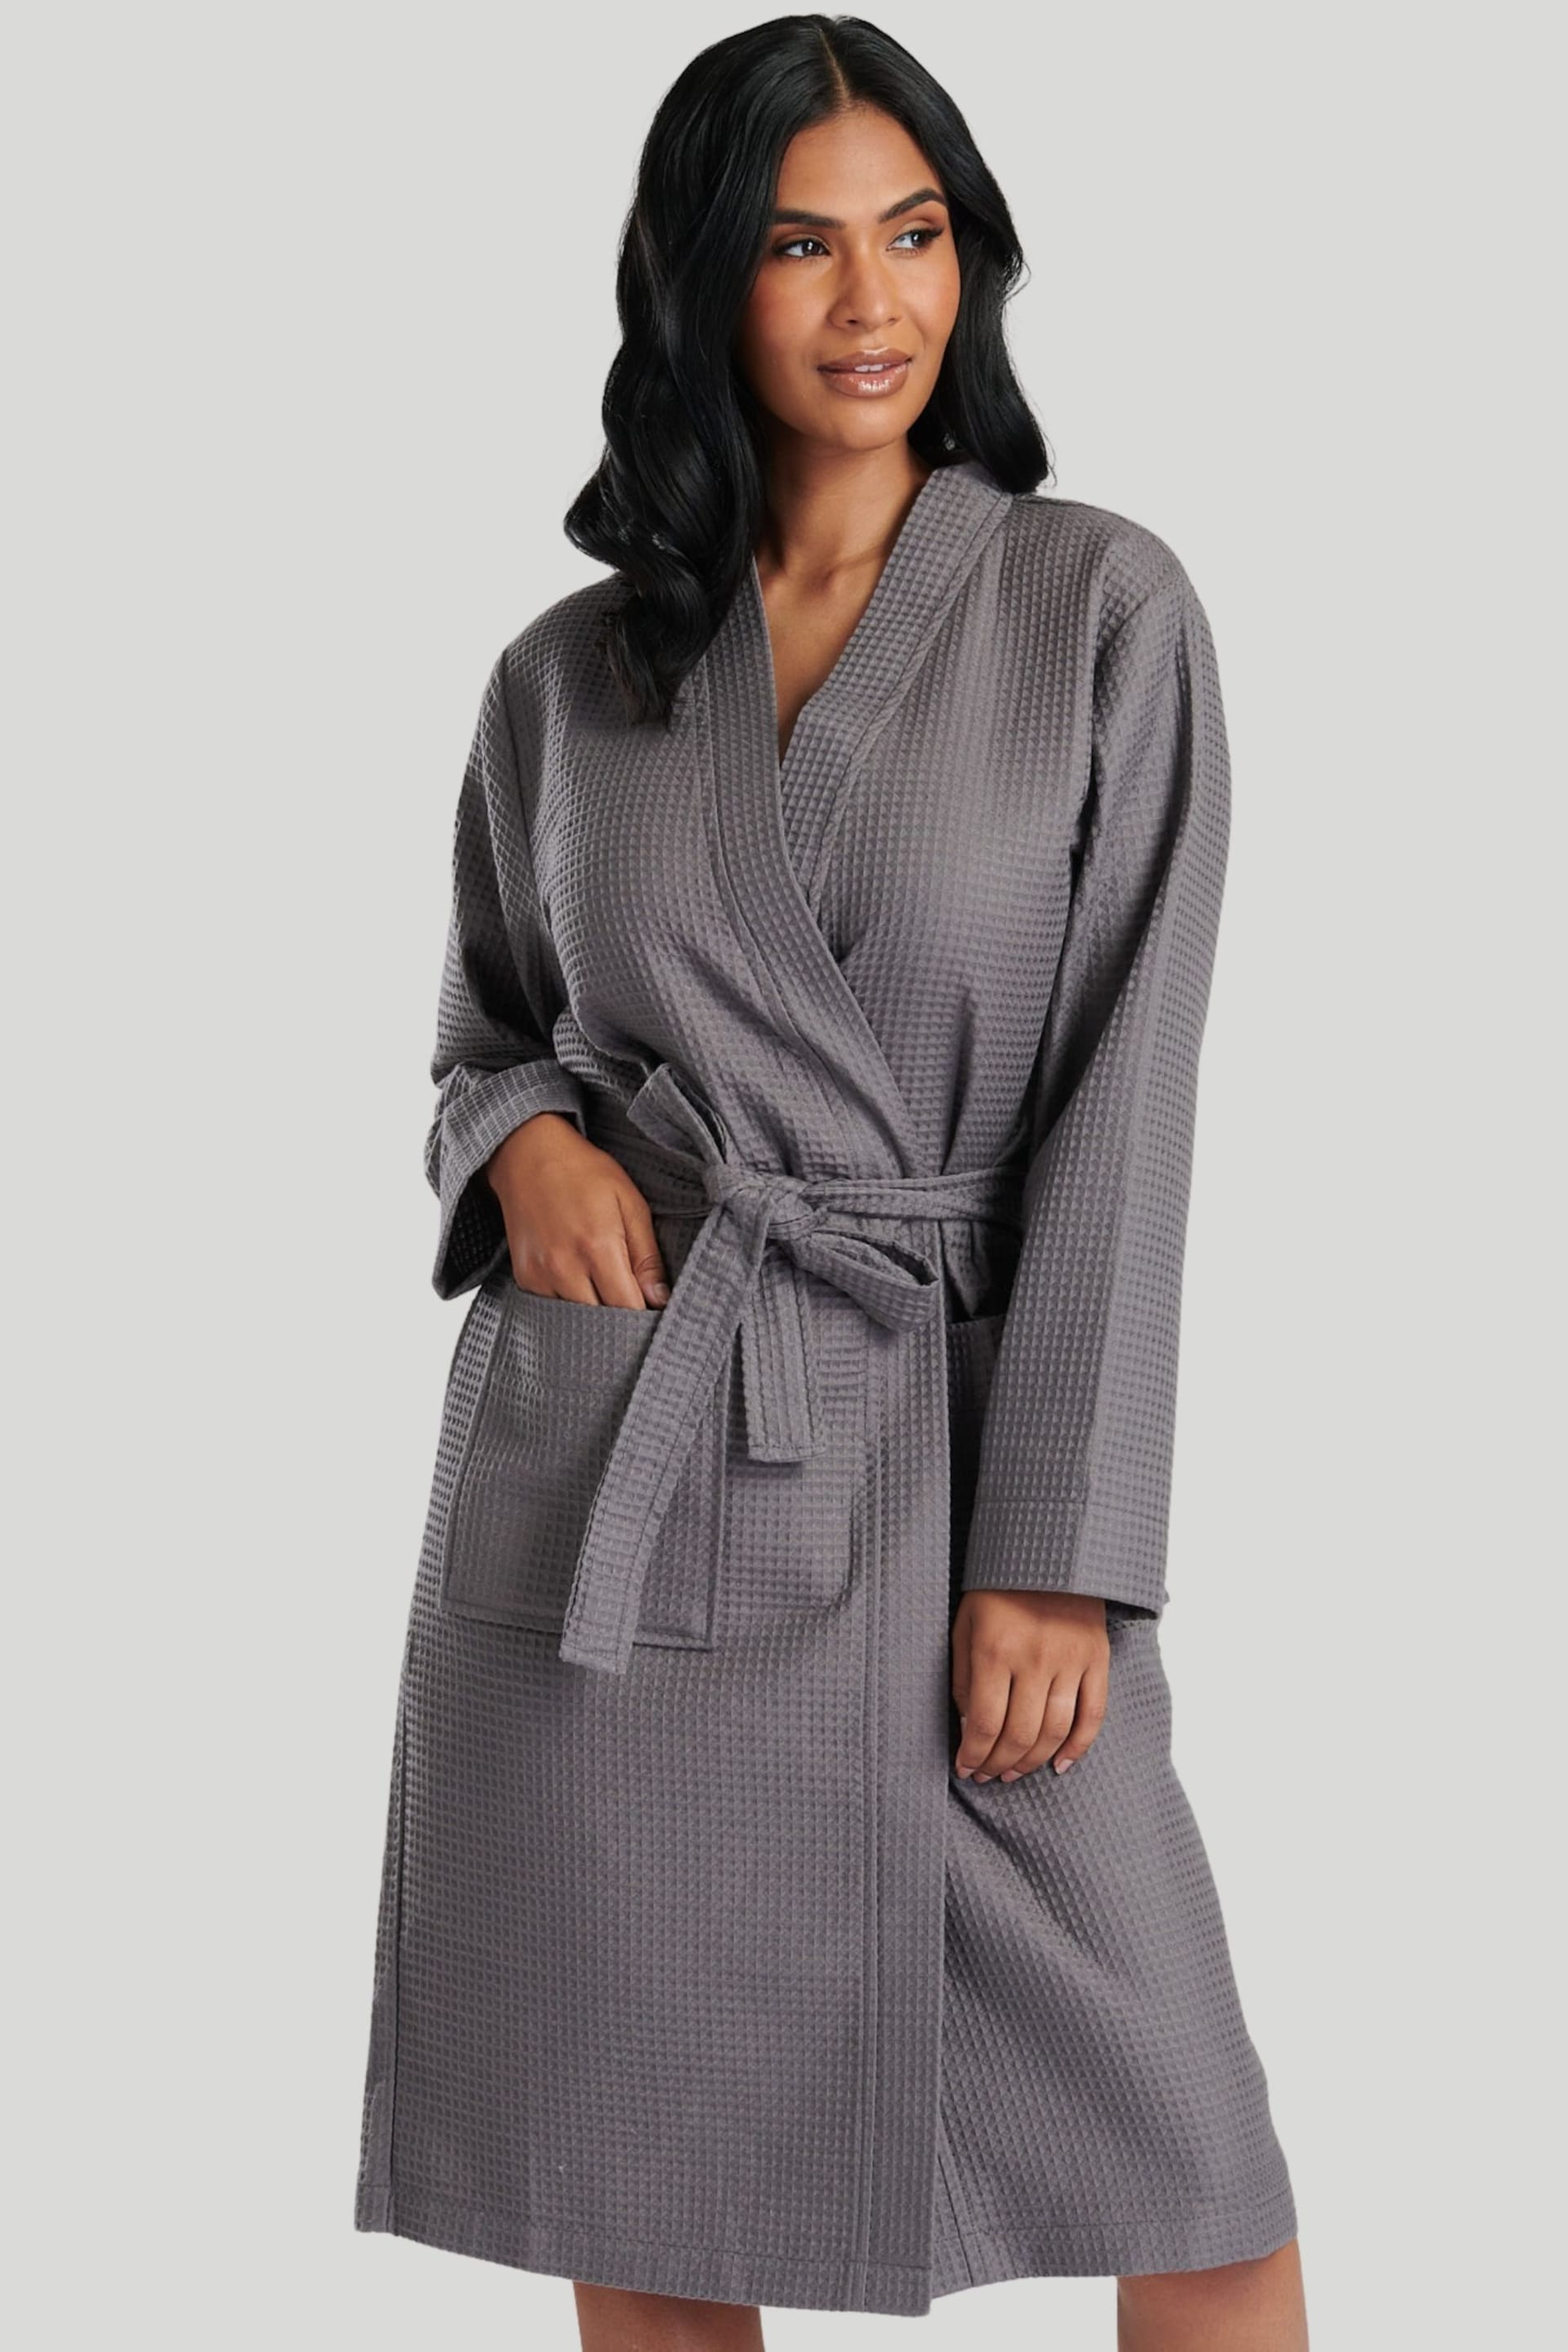 Loungeable Grey Cotton Waffle Robe - Image 1 of 7